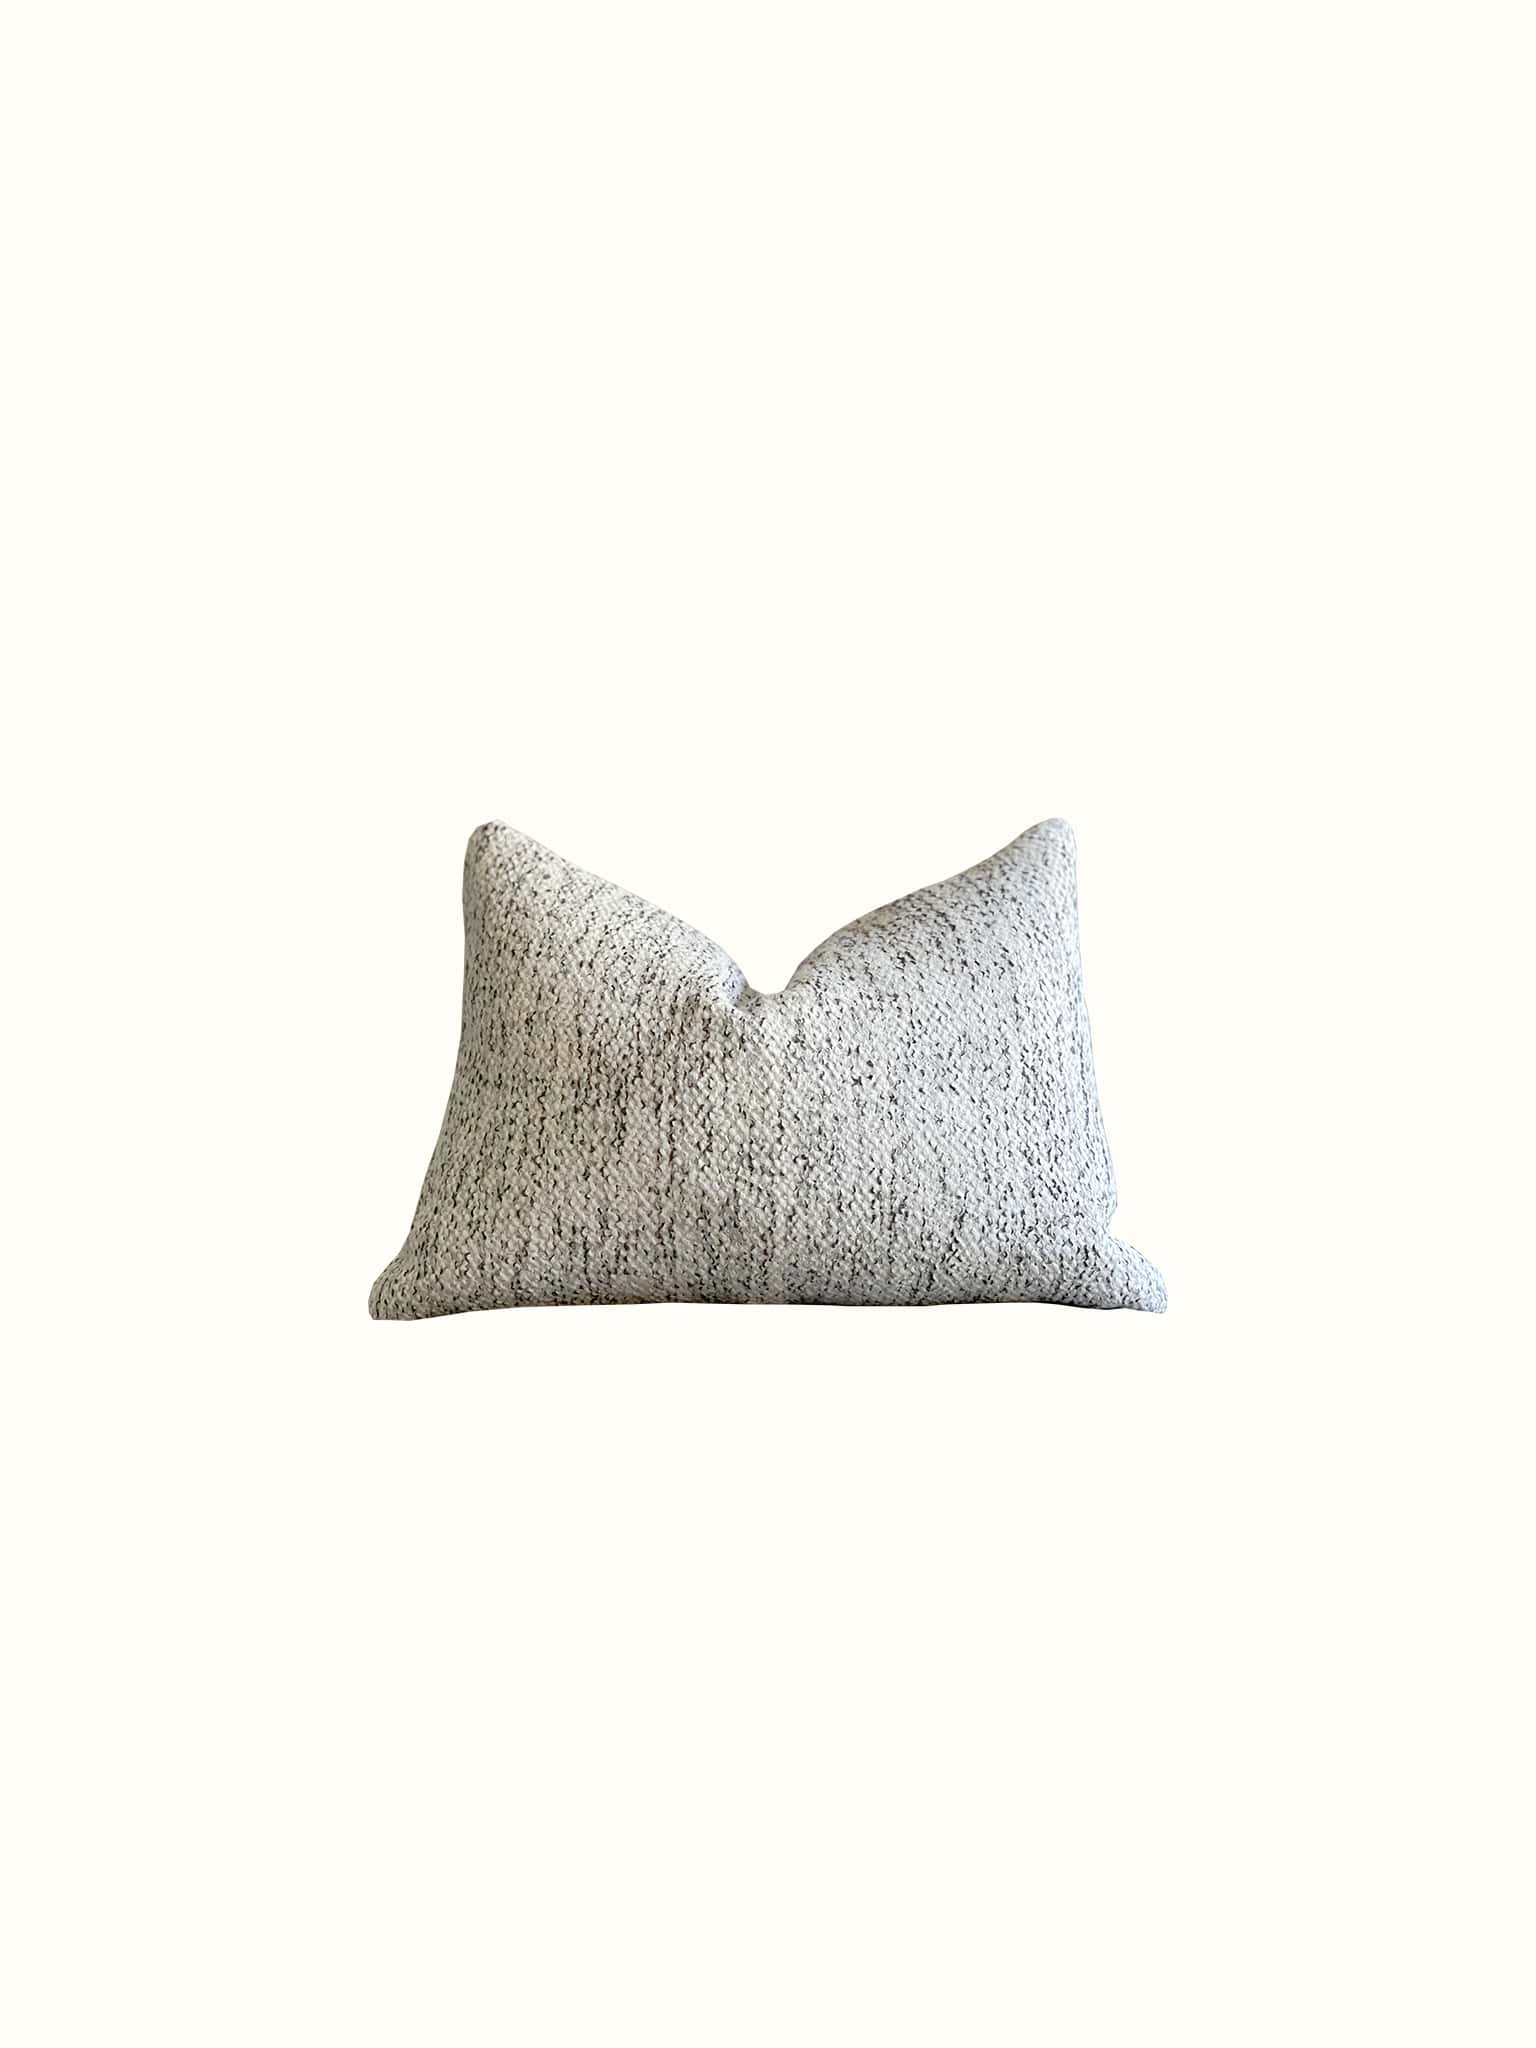 18x18 Boucle Foil Marble With Tassels Square Throw Pillow Ivory/silver -  Vcny Home : Target